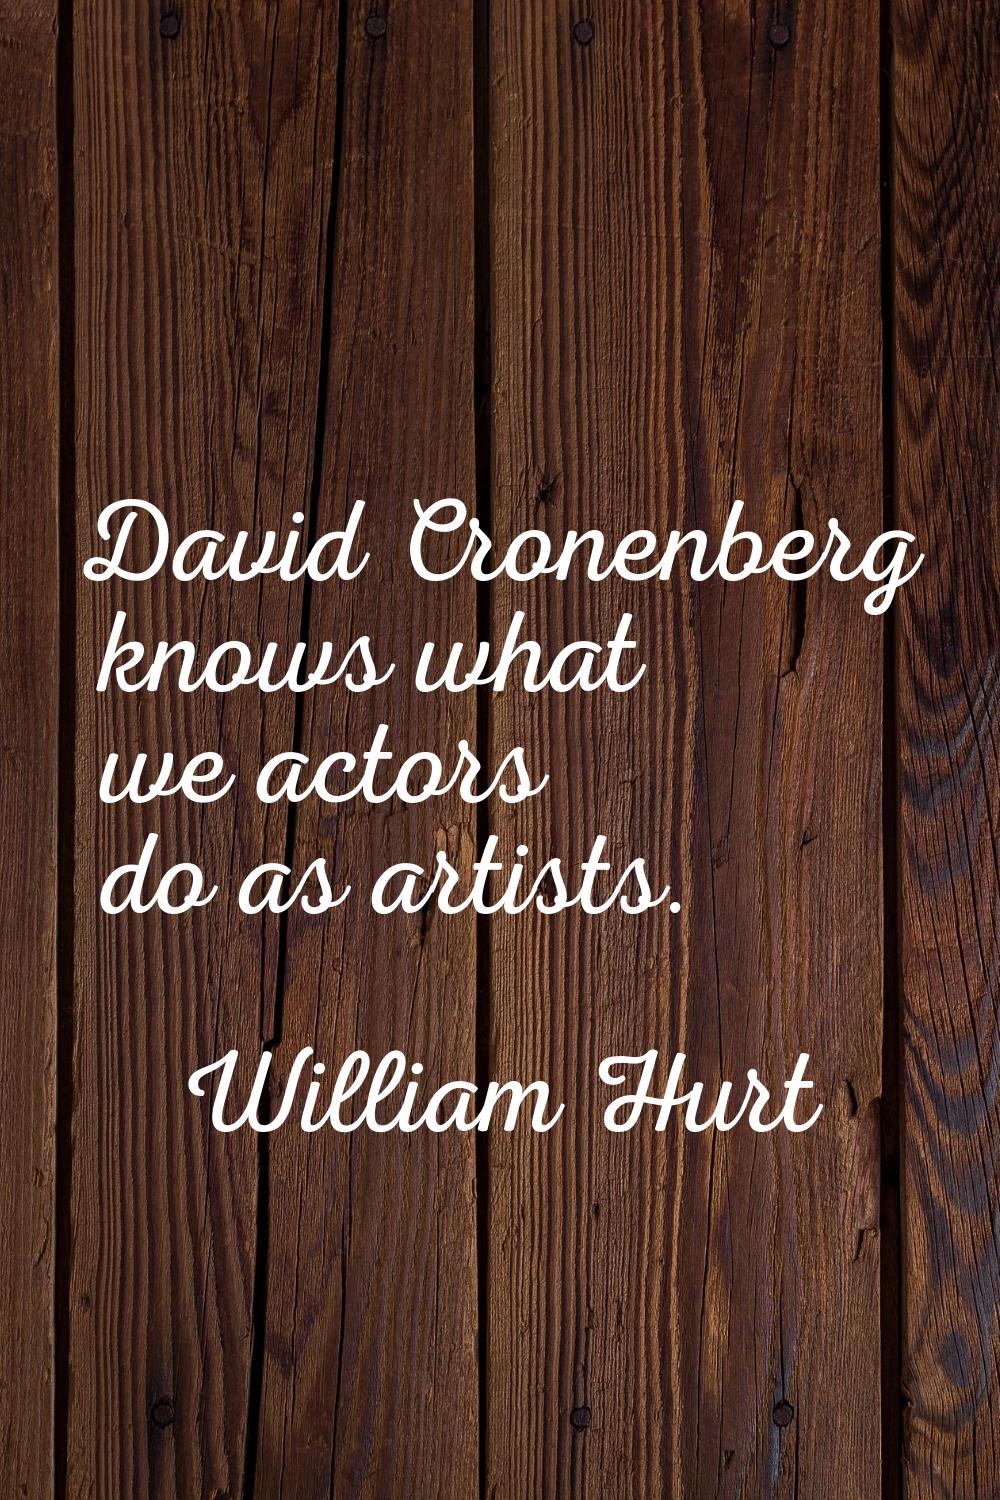 David Cronenberg knows what we actors do as artists.